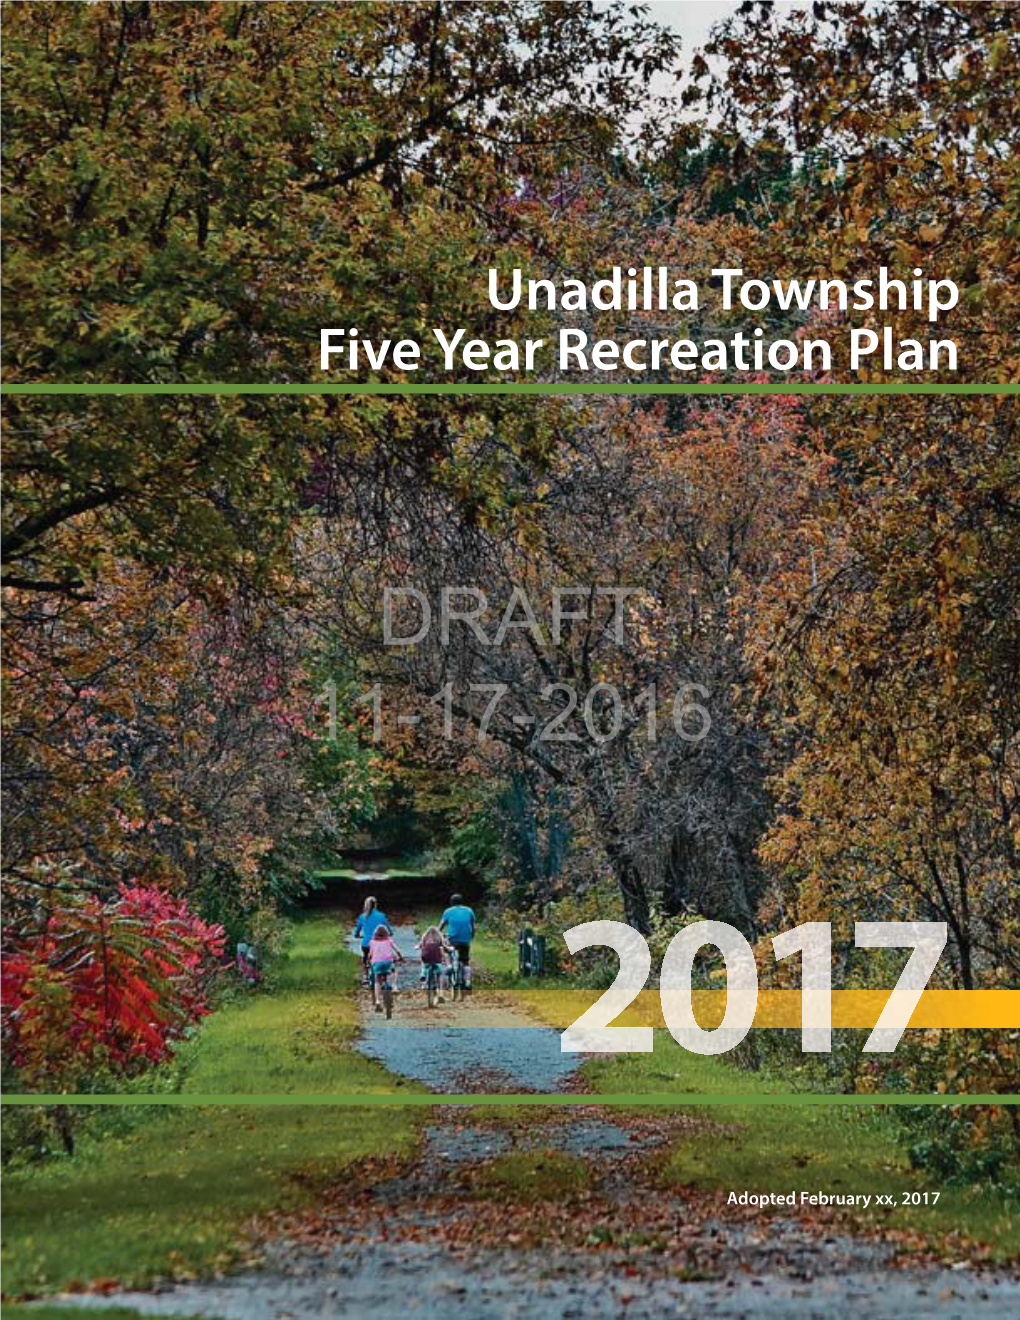 To View the Recreation Master Plan